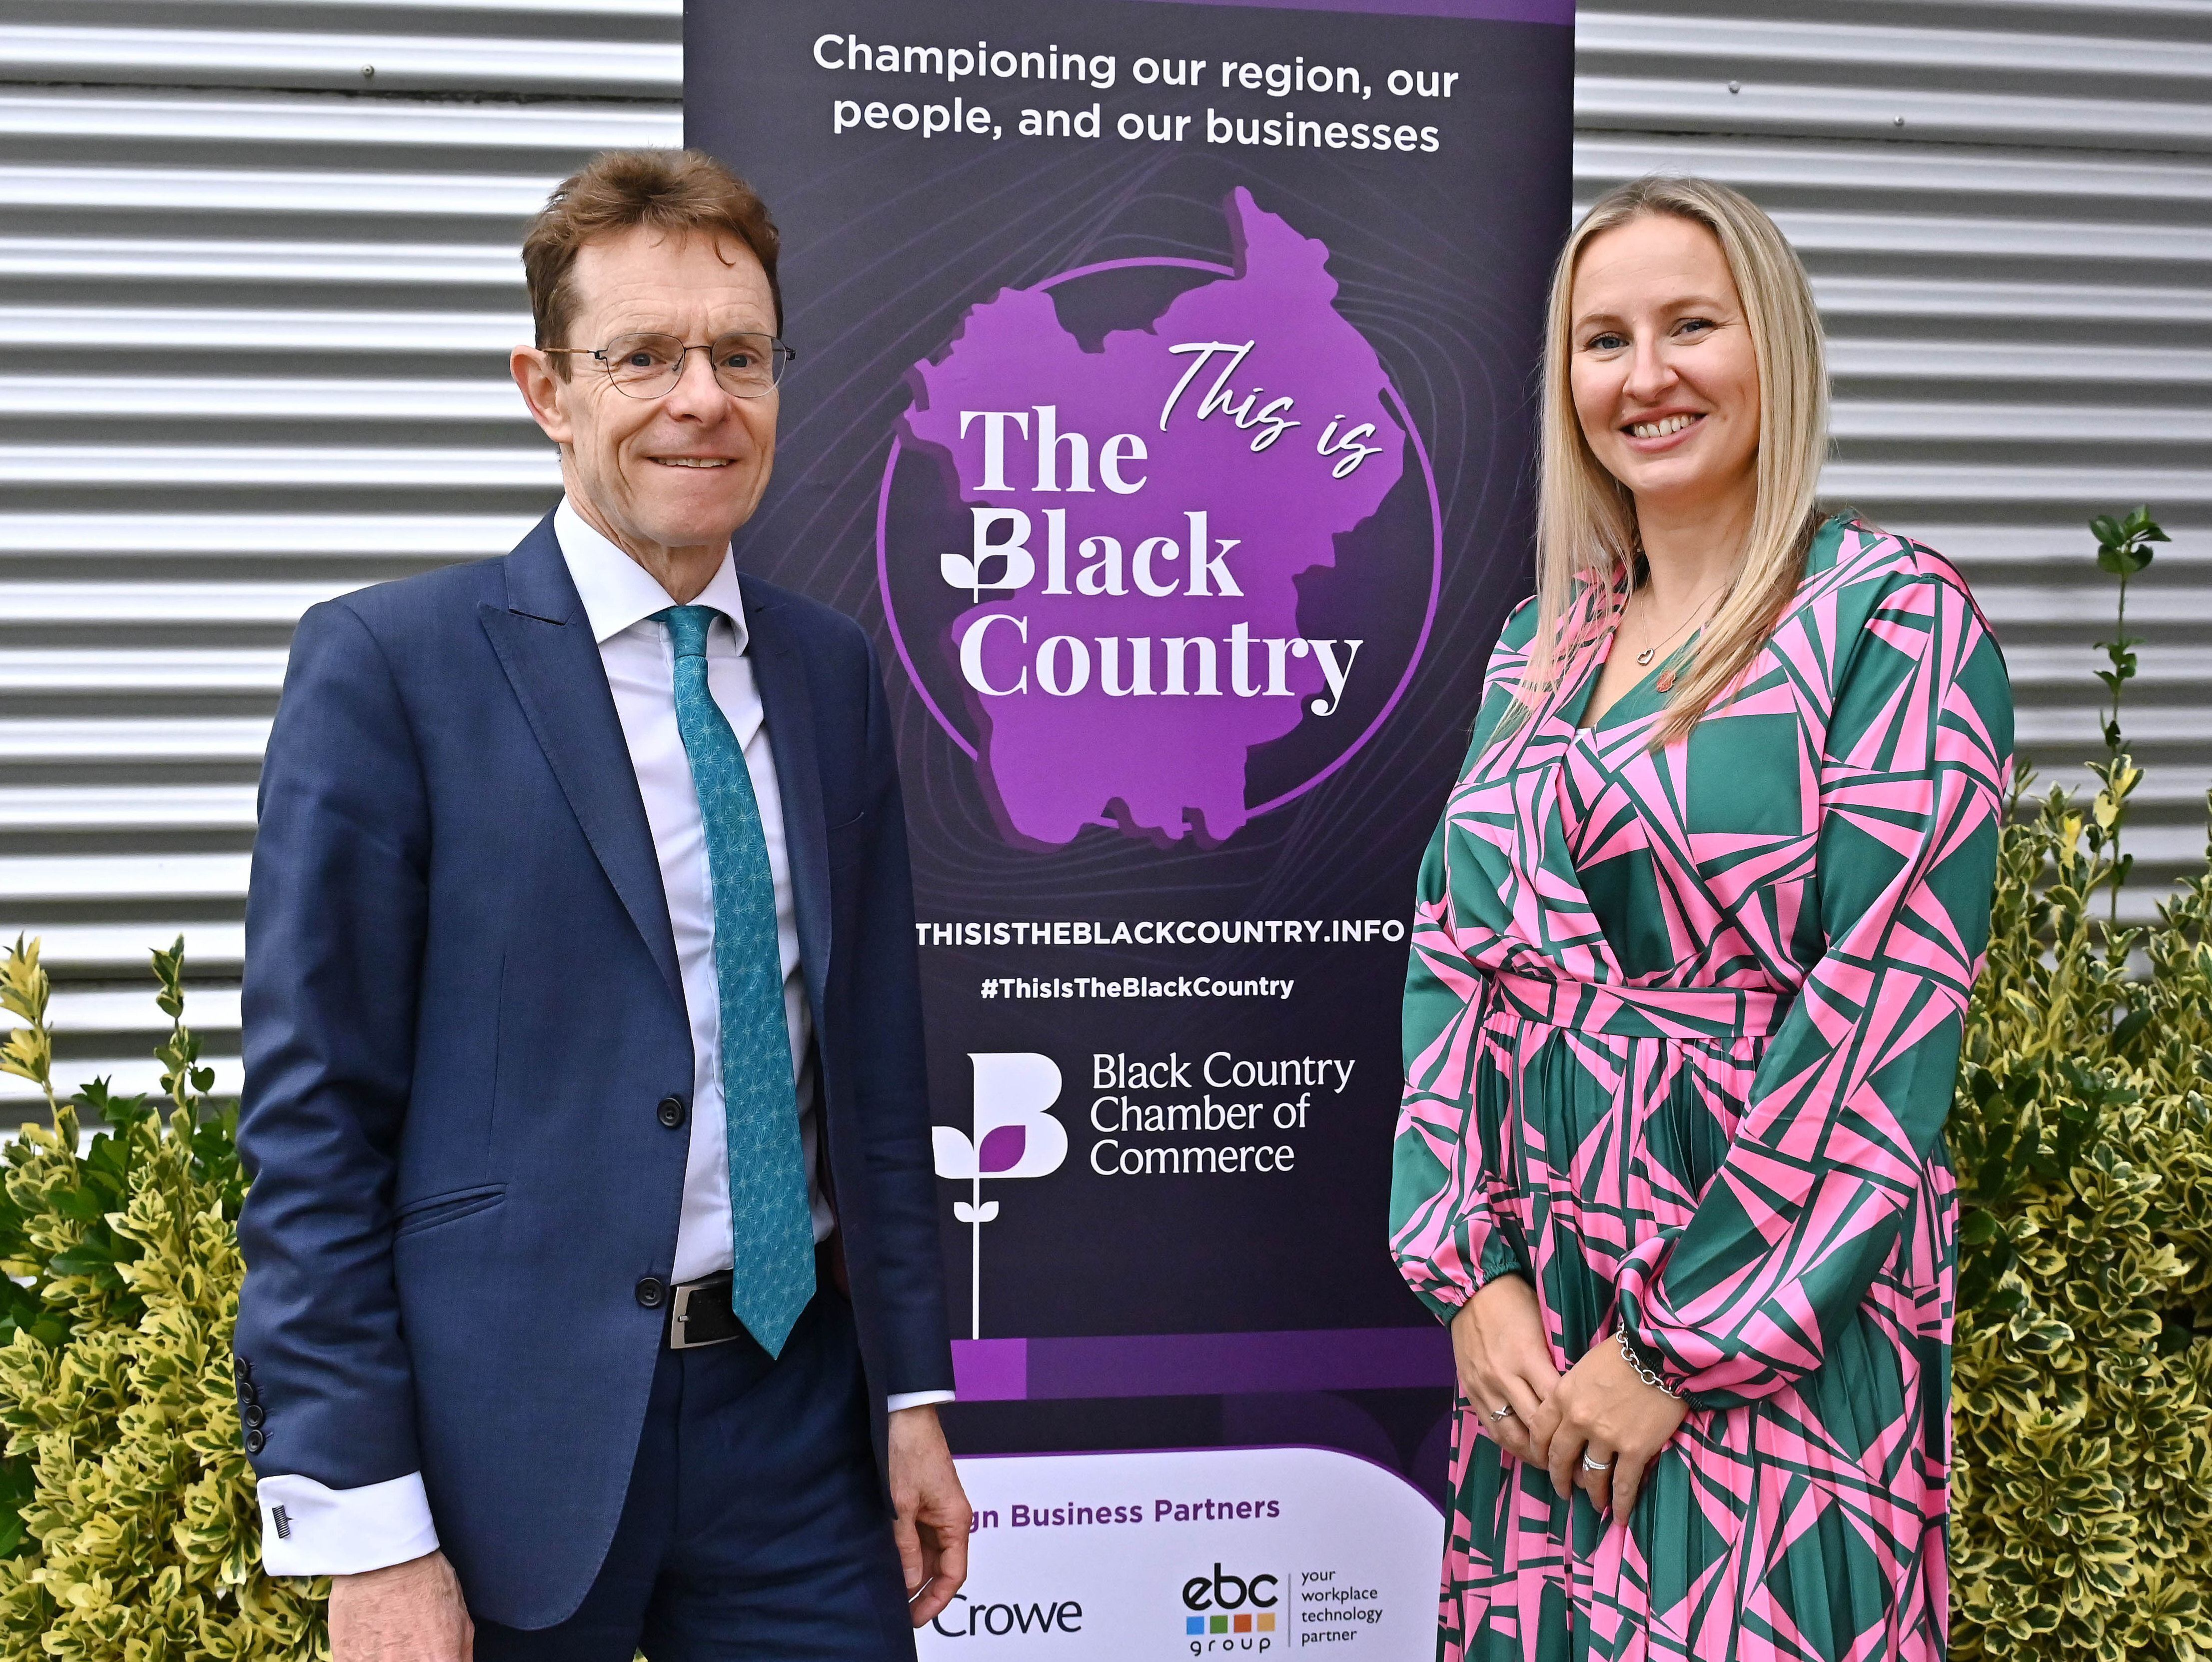 Team work needed to raise Black Country's fortunes